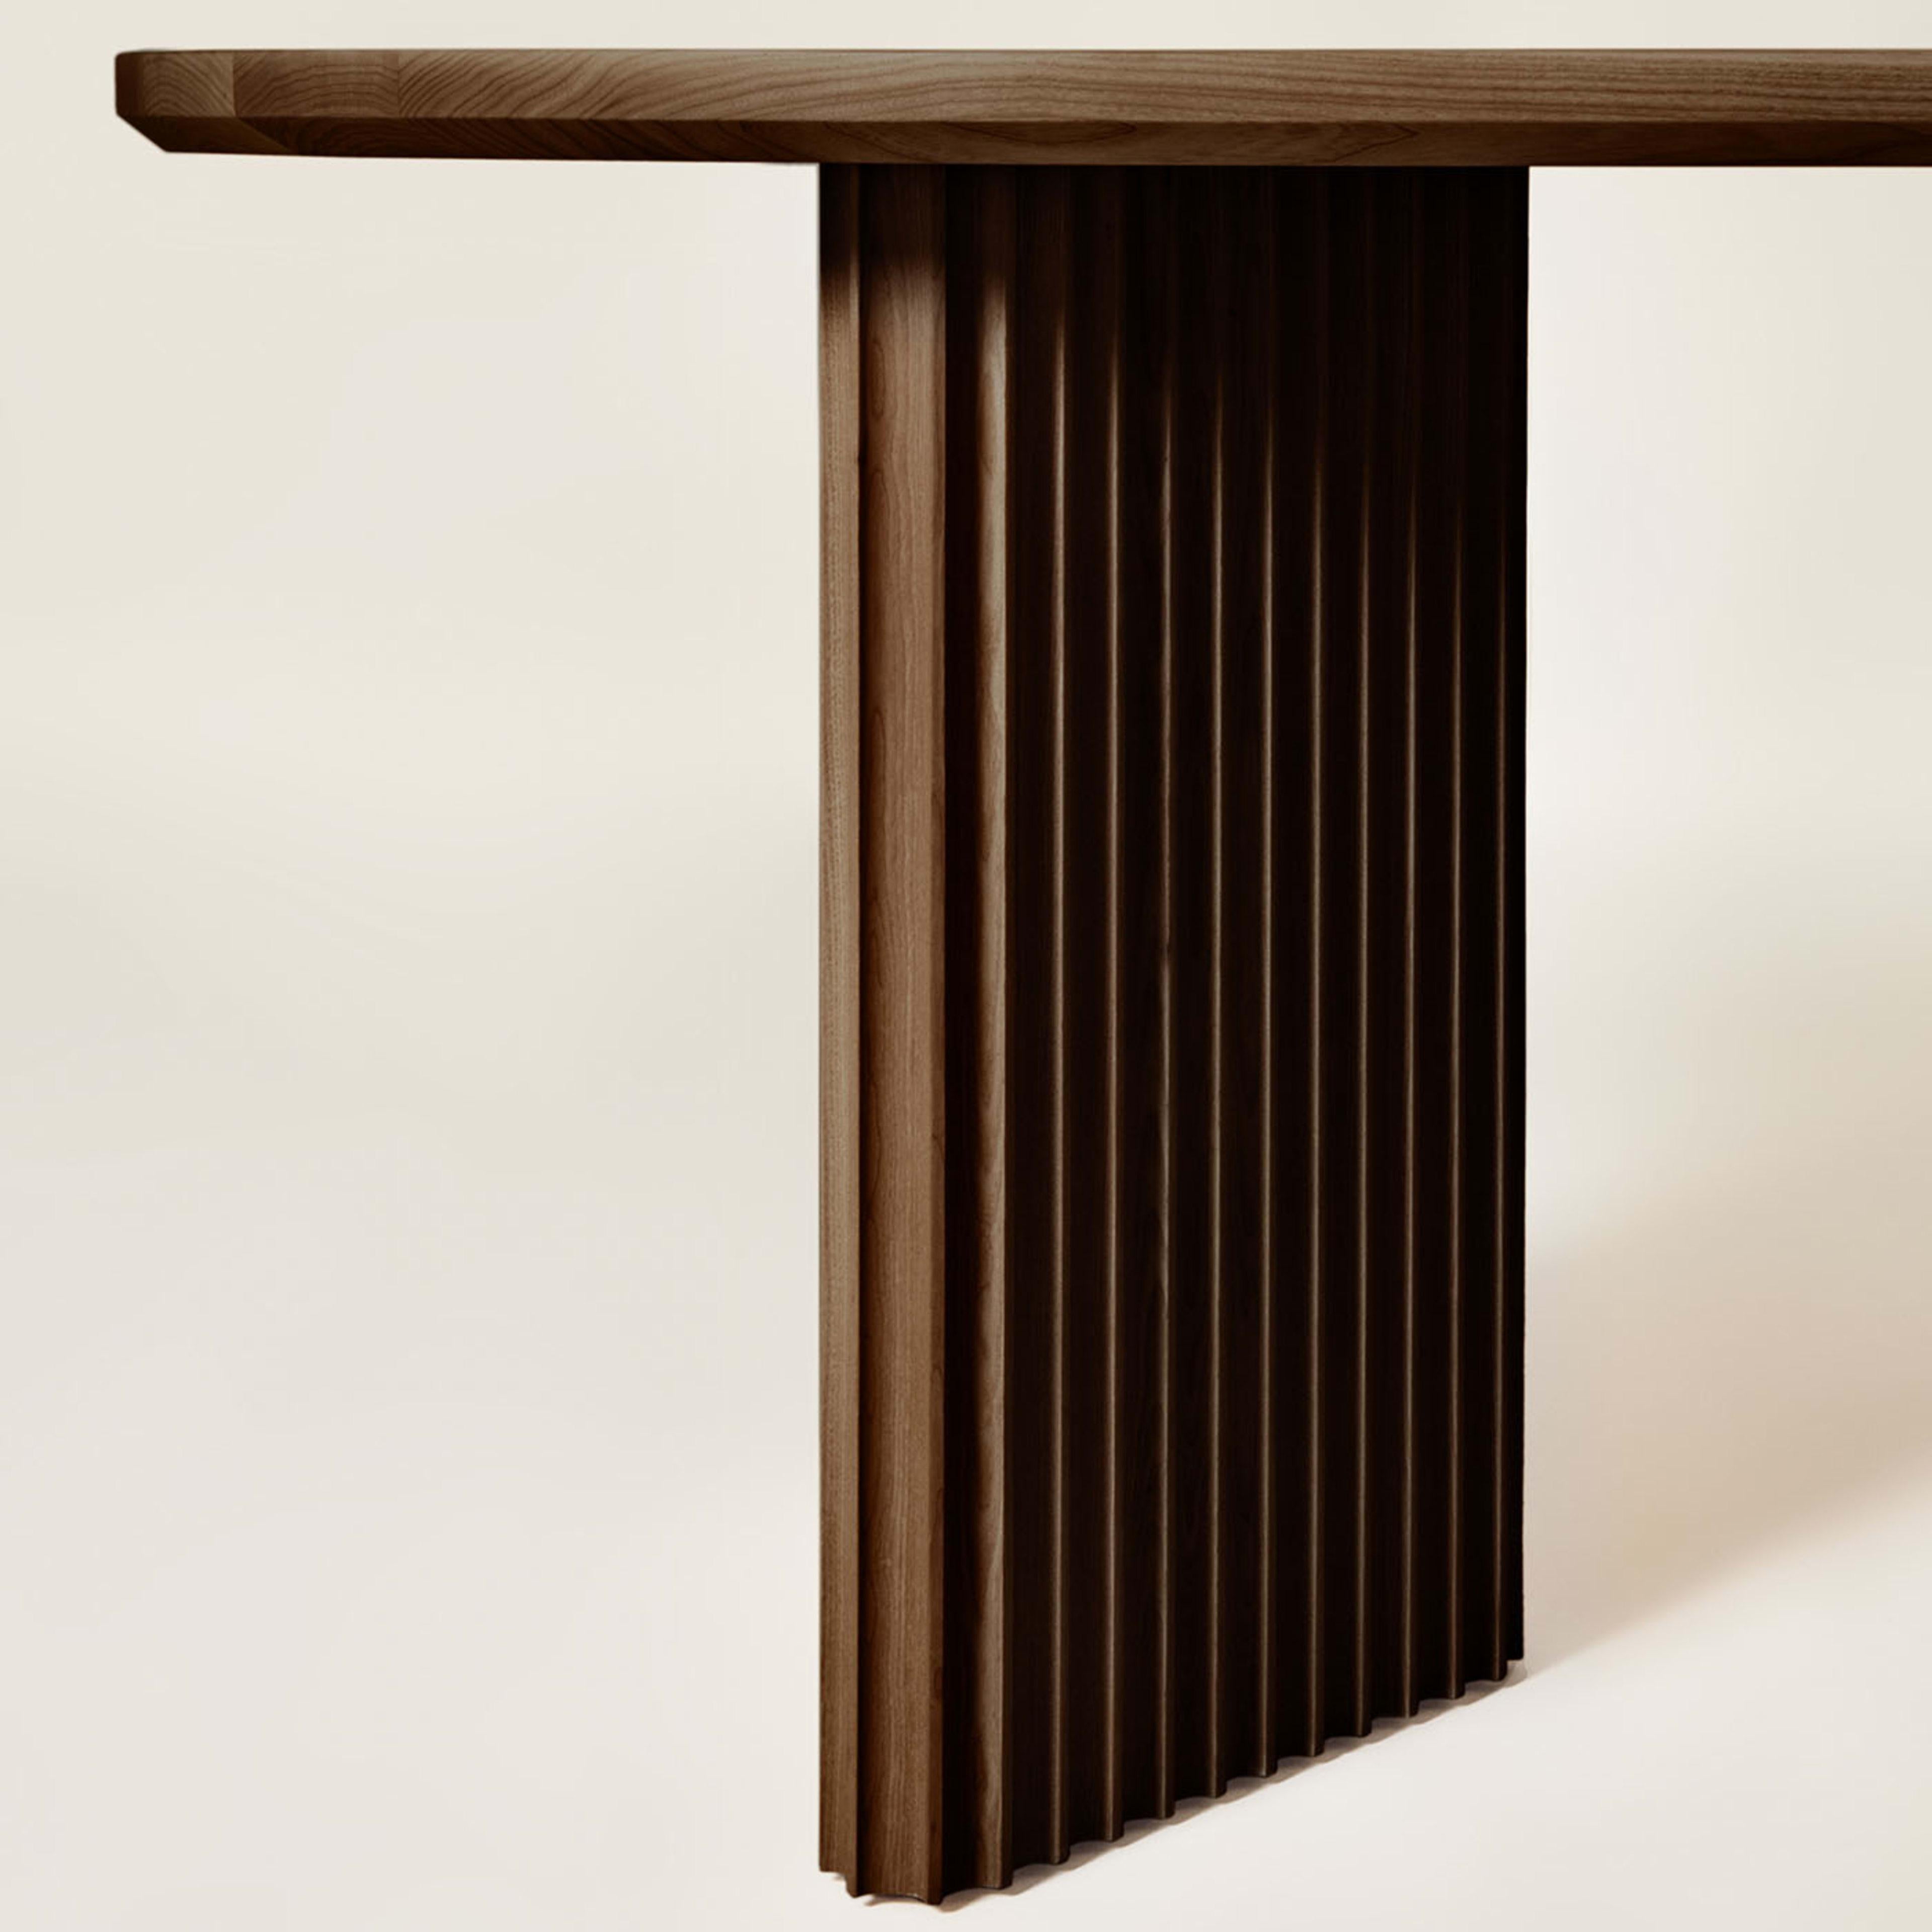 Basalto Brown Ash Table In New Condition For Sale In Milan, IT